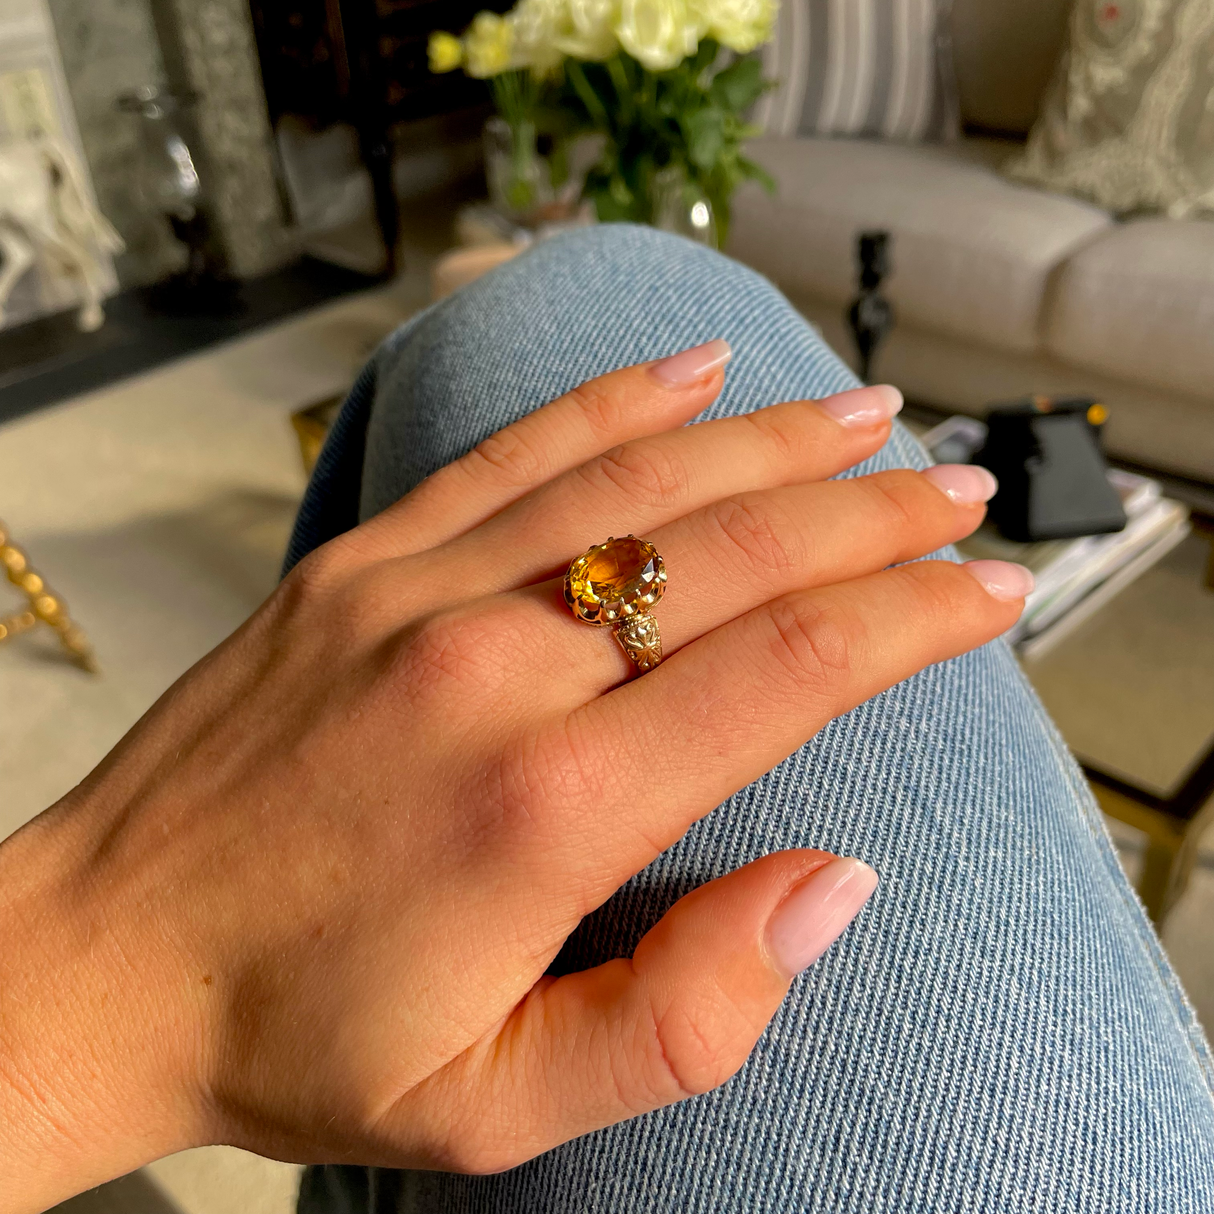 Imperial topaz single stone ring, worn on hand.